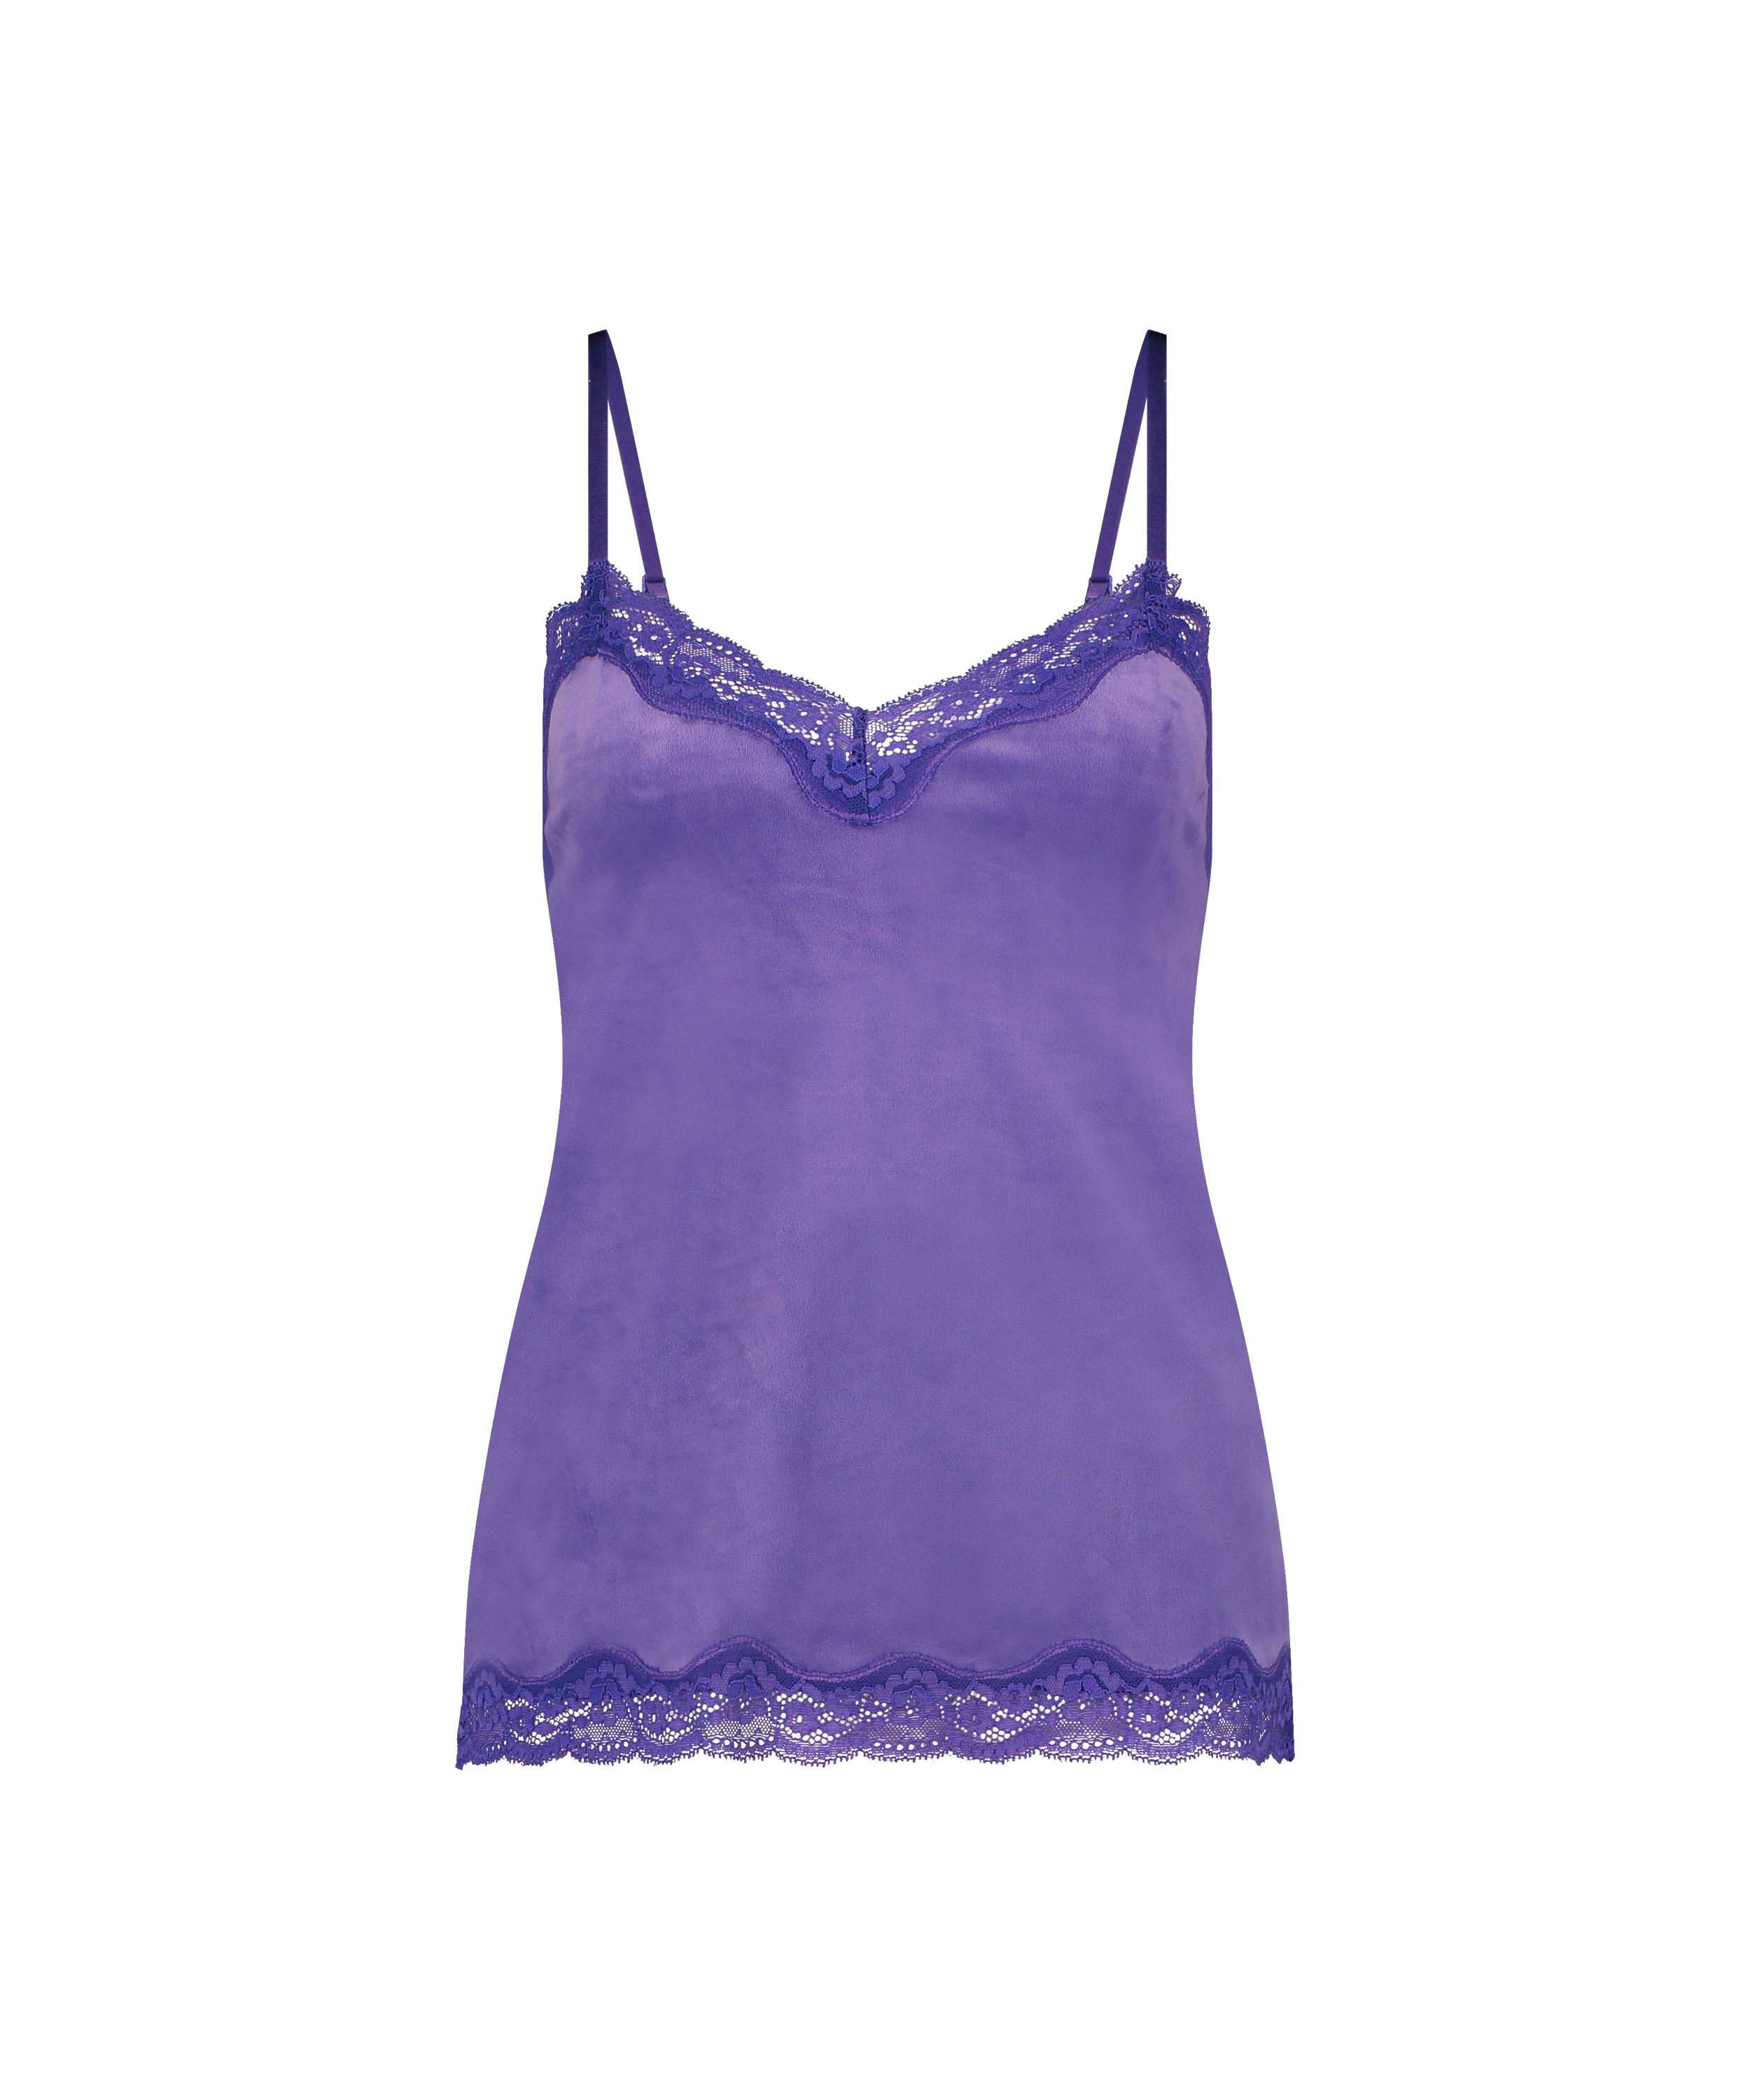 Cami top Velours Lace, Paars, main